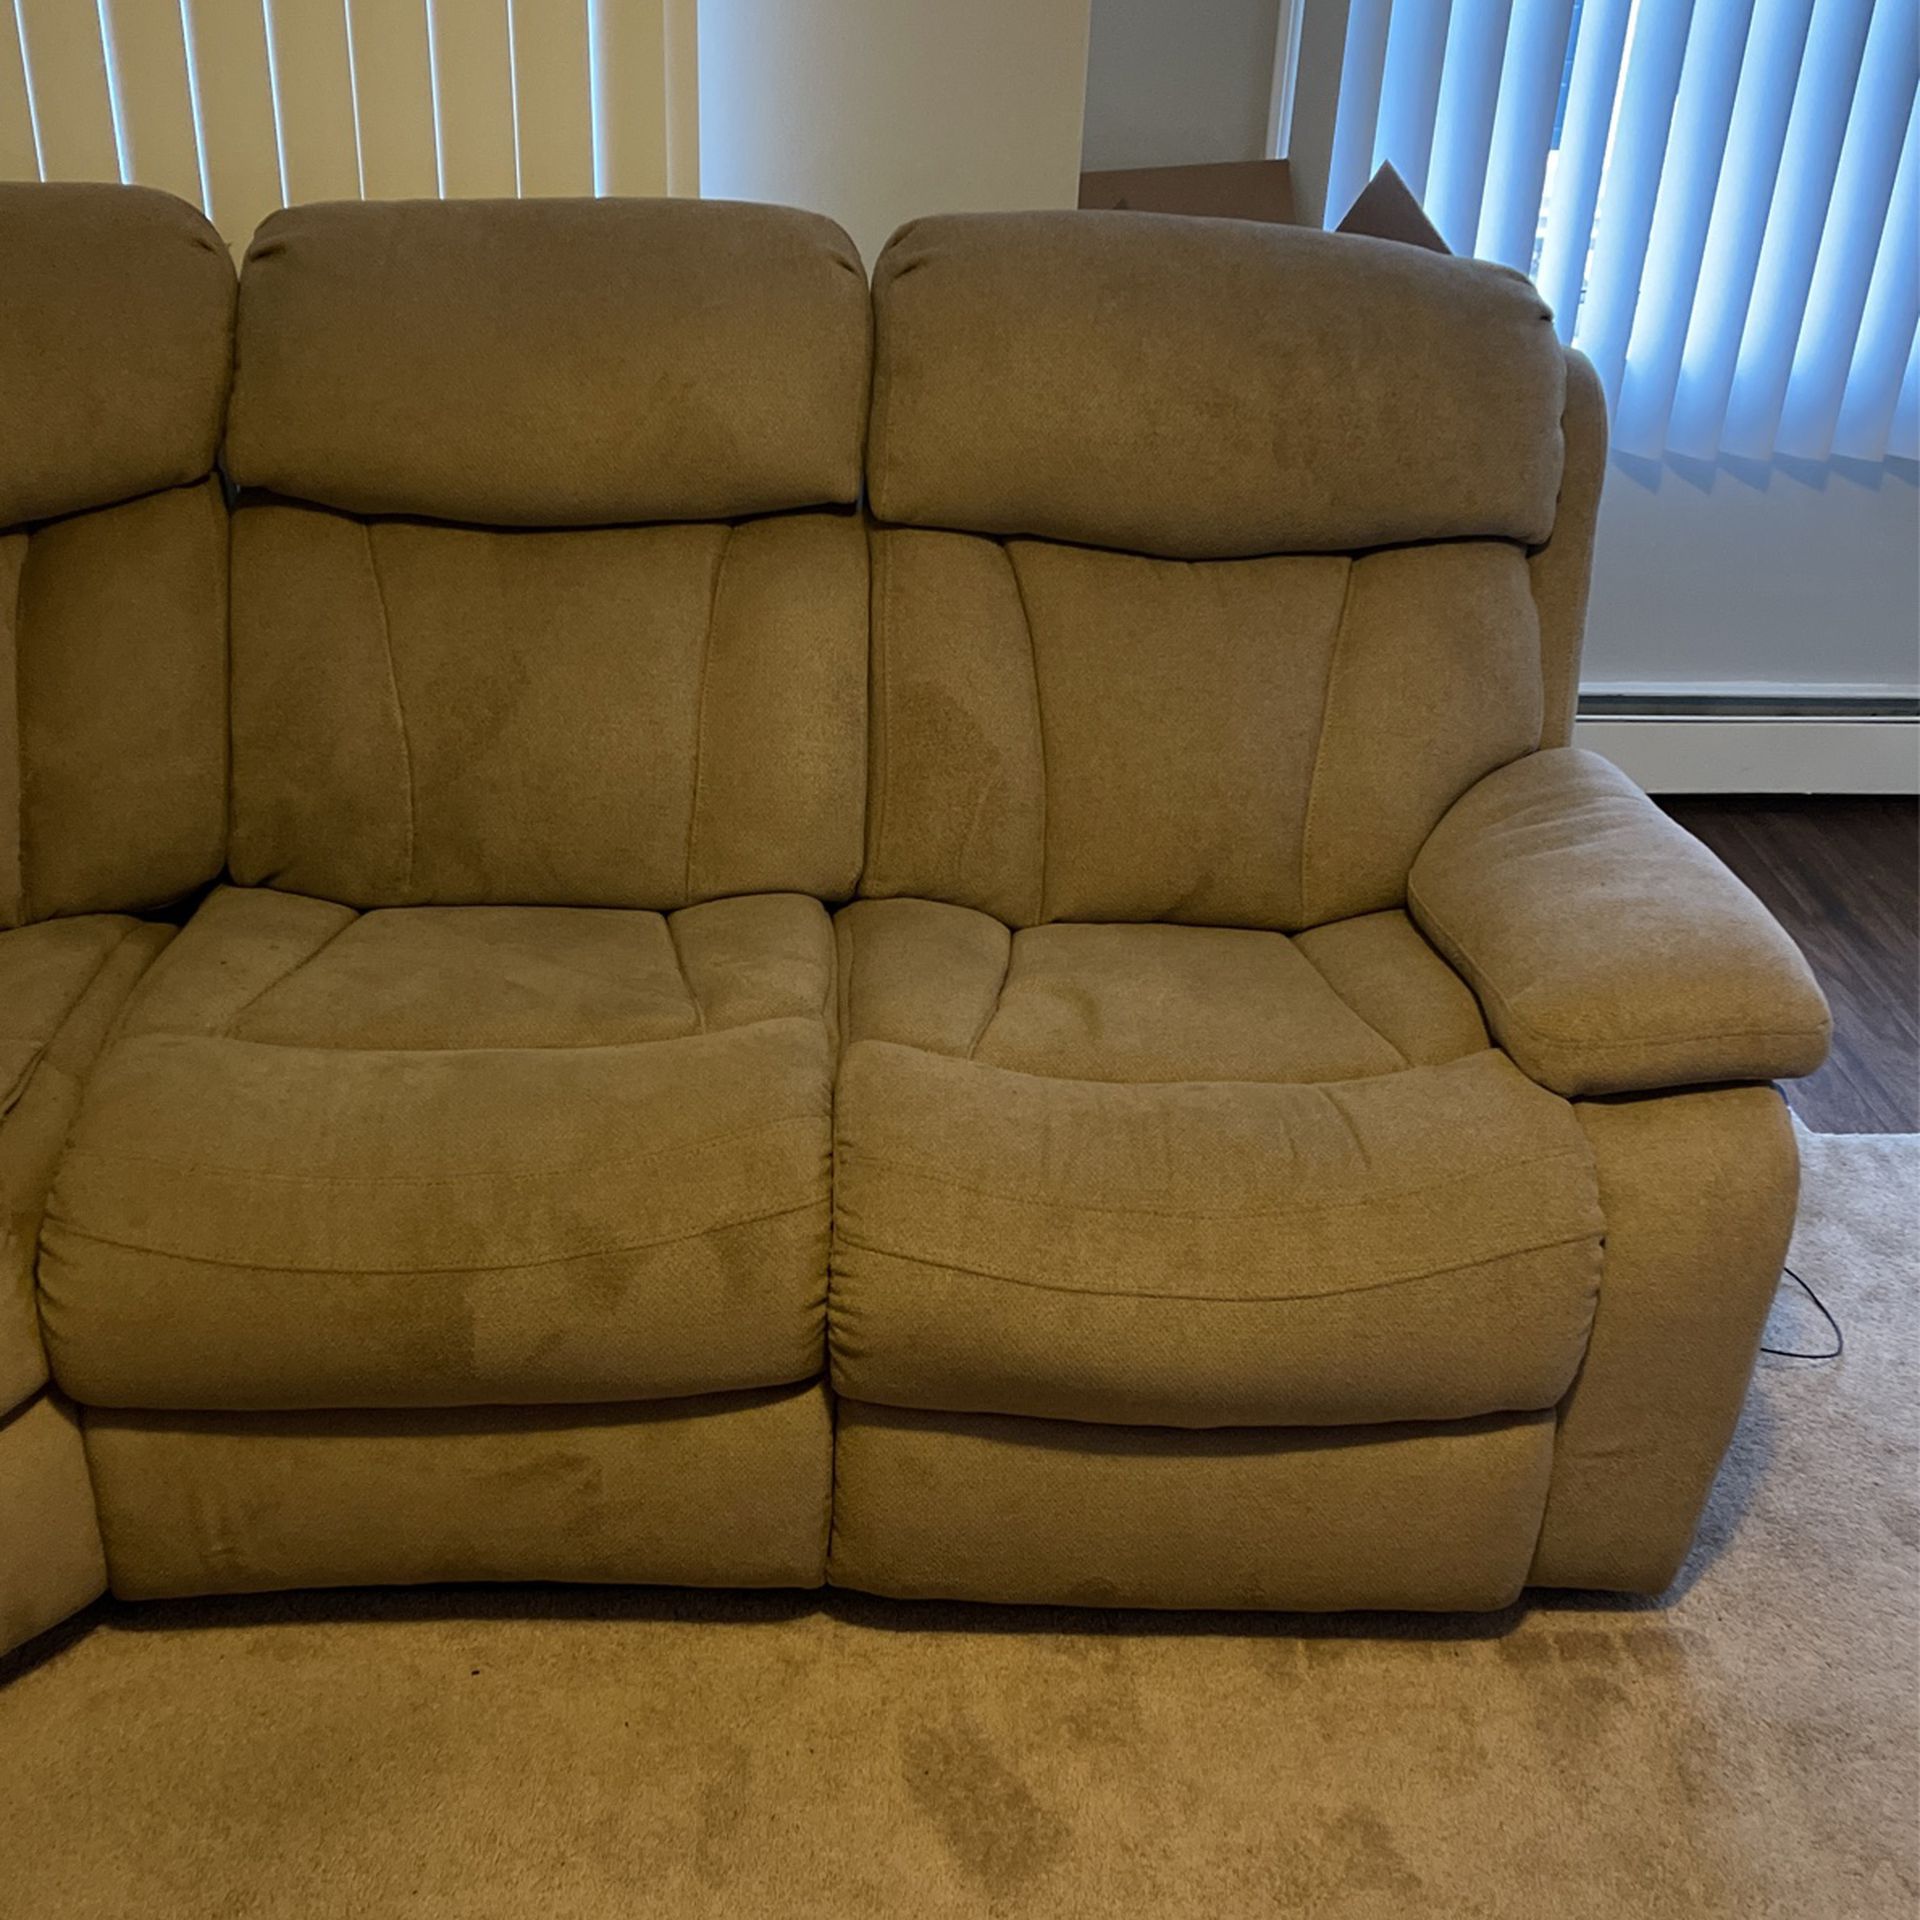 Sectional Couch w/ 3 Reclining Seats. Cup holder Cooling, heated Seats, And Massage Features .